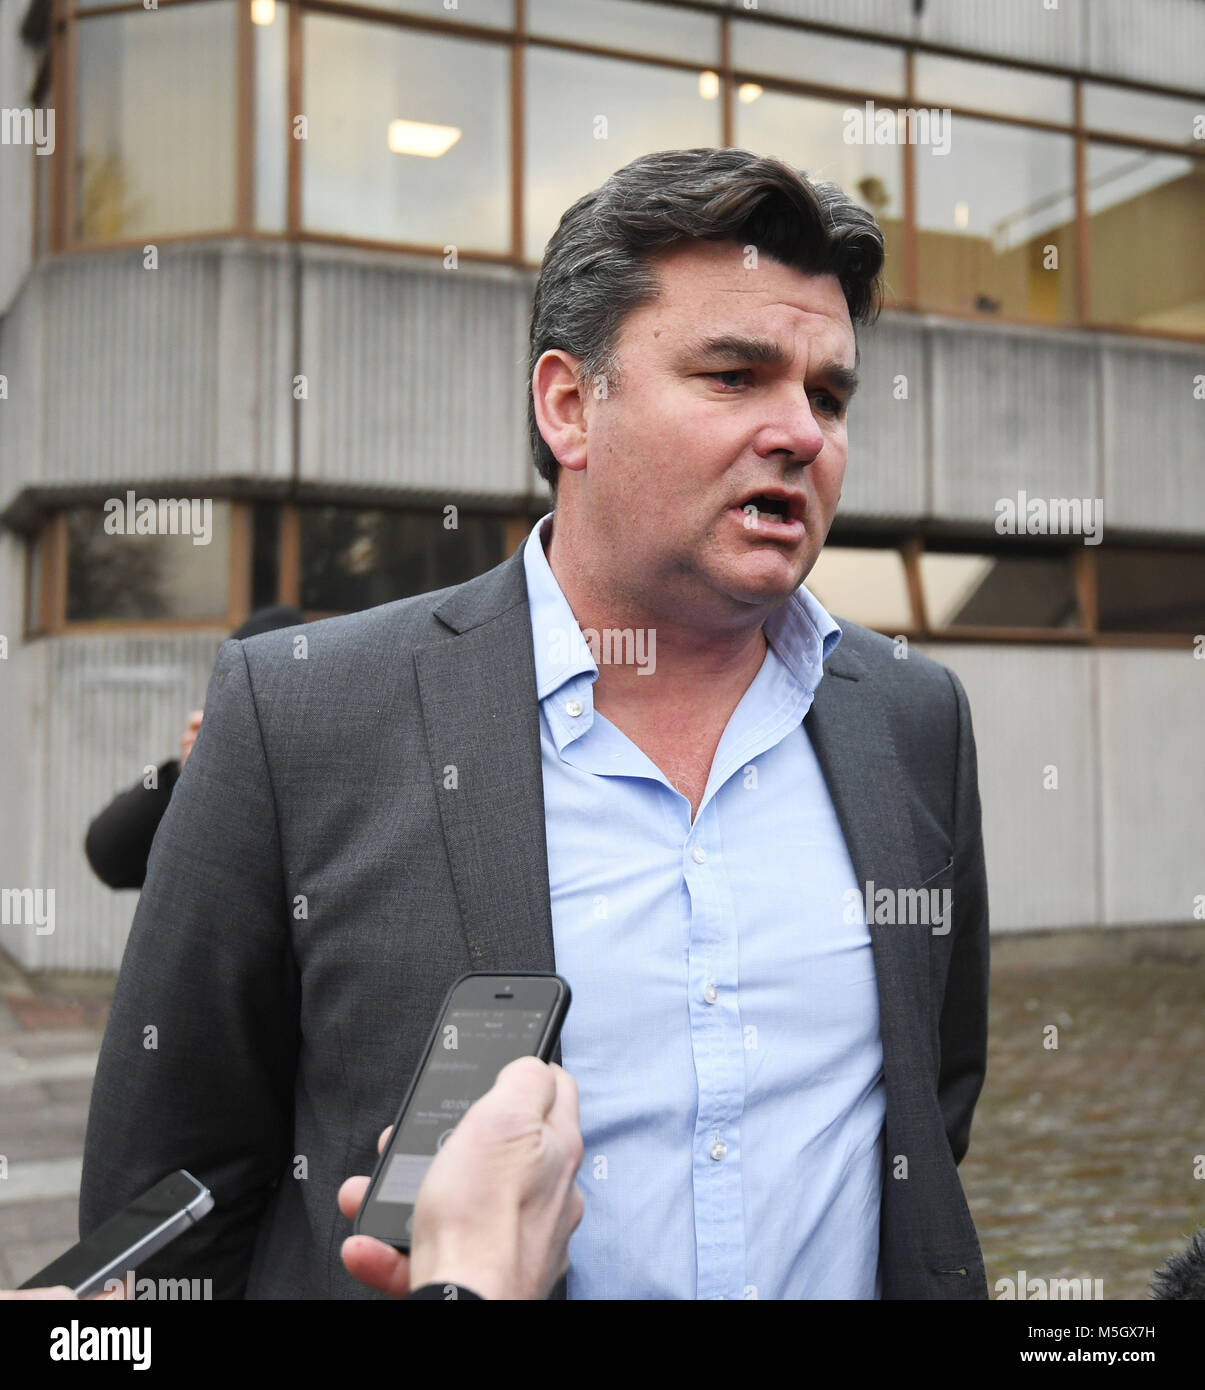 Former BHS owner Dominic Chappell speaks to press outside Barkingside Magistrates' Court, where he has been ordered to pay &Acirc;£87,170 after failing to provide information about the firm's pension schemes to investigators when it collapsed with the loss of thousands of jobs. Stock Photo